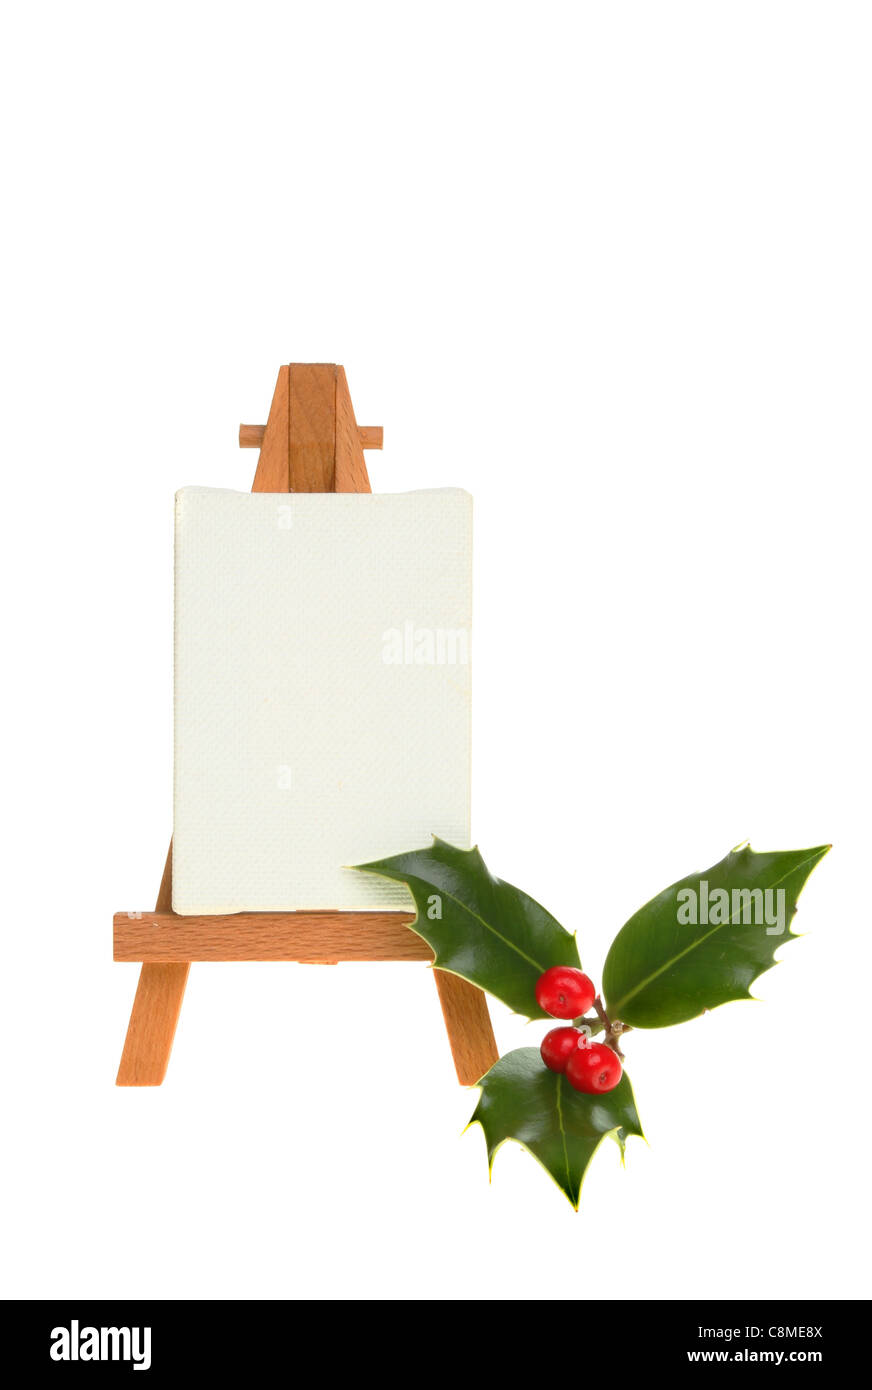 Sprig of fresh holly with berries next to an easel with a blank canvas isolated against white Stock Photo